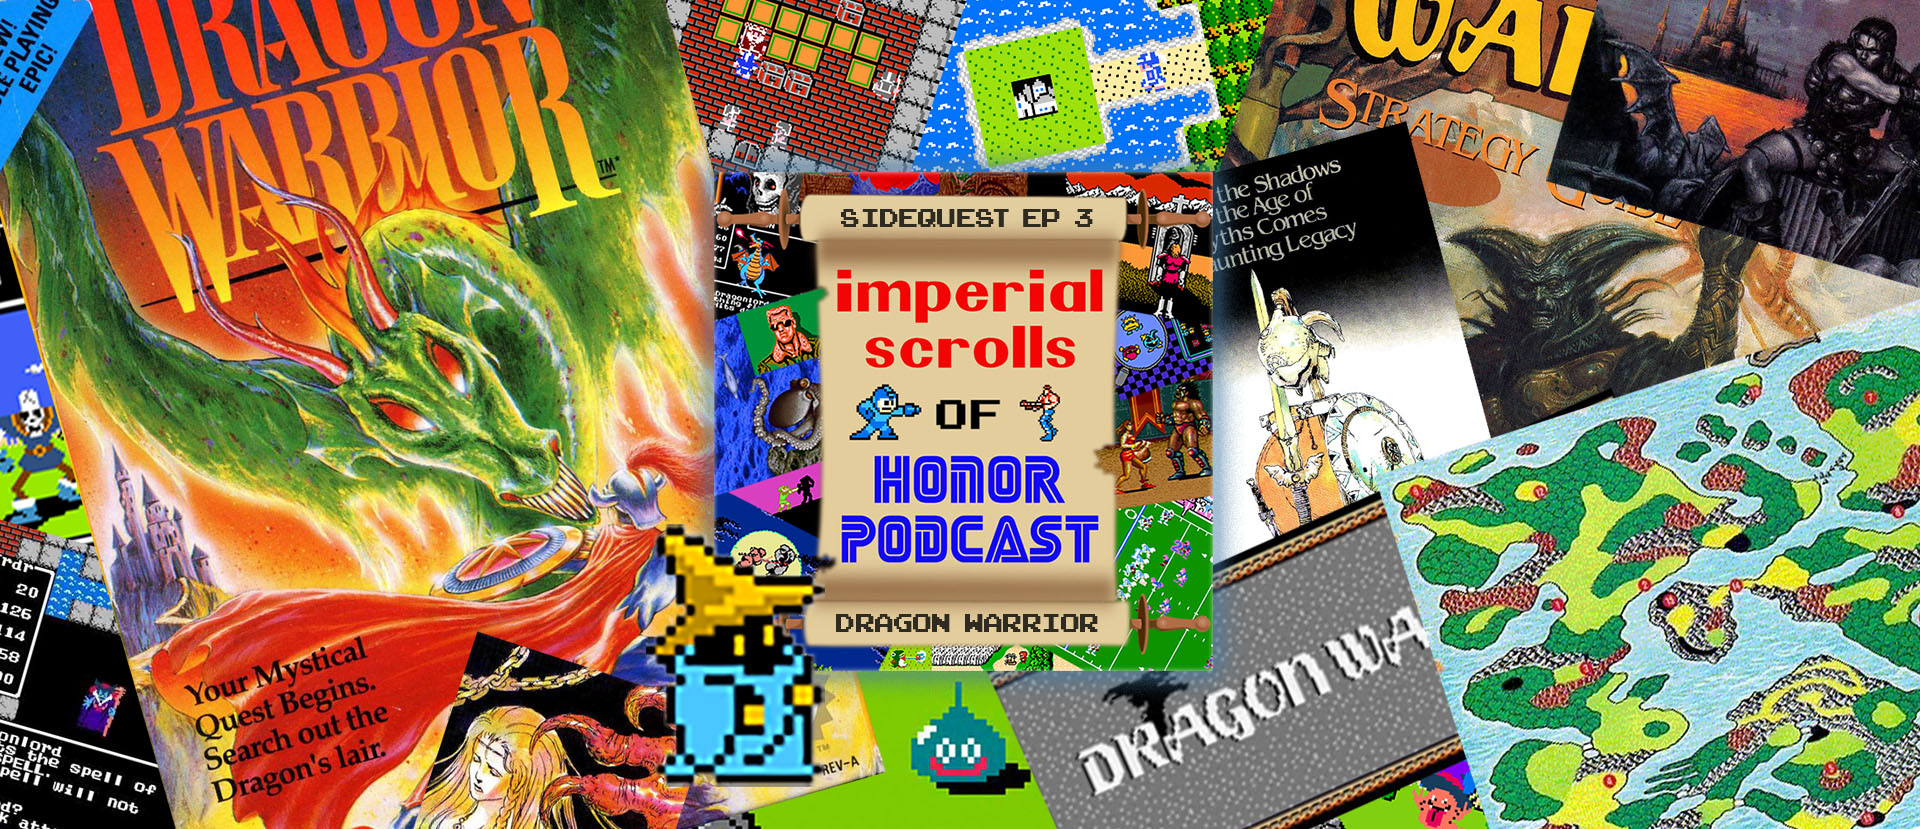 Imperial Scrolls of Honor Podcast - Dragon Warrior SIDEQUEST Ep 3